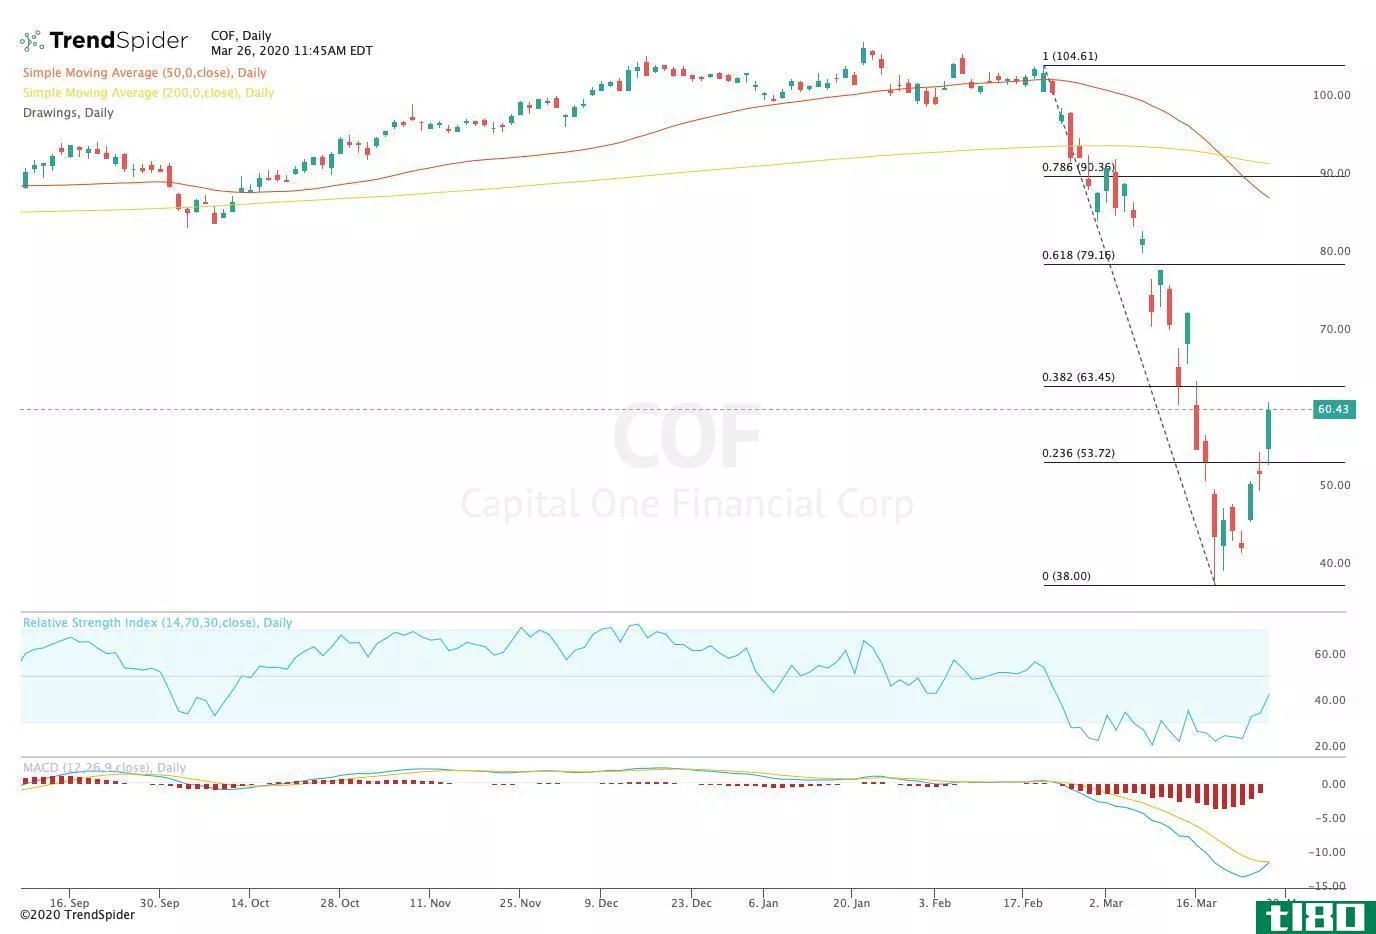 Chart showing the share price performance of Capital One Financial Corporation (COF)